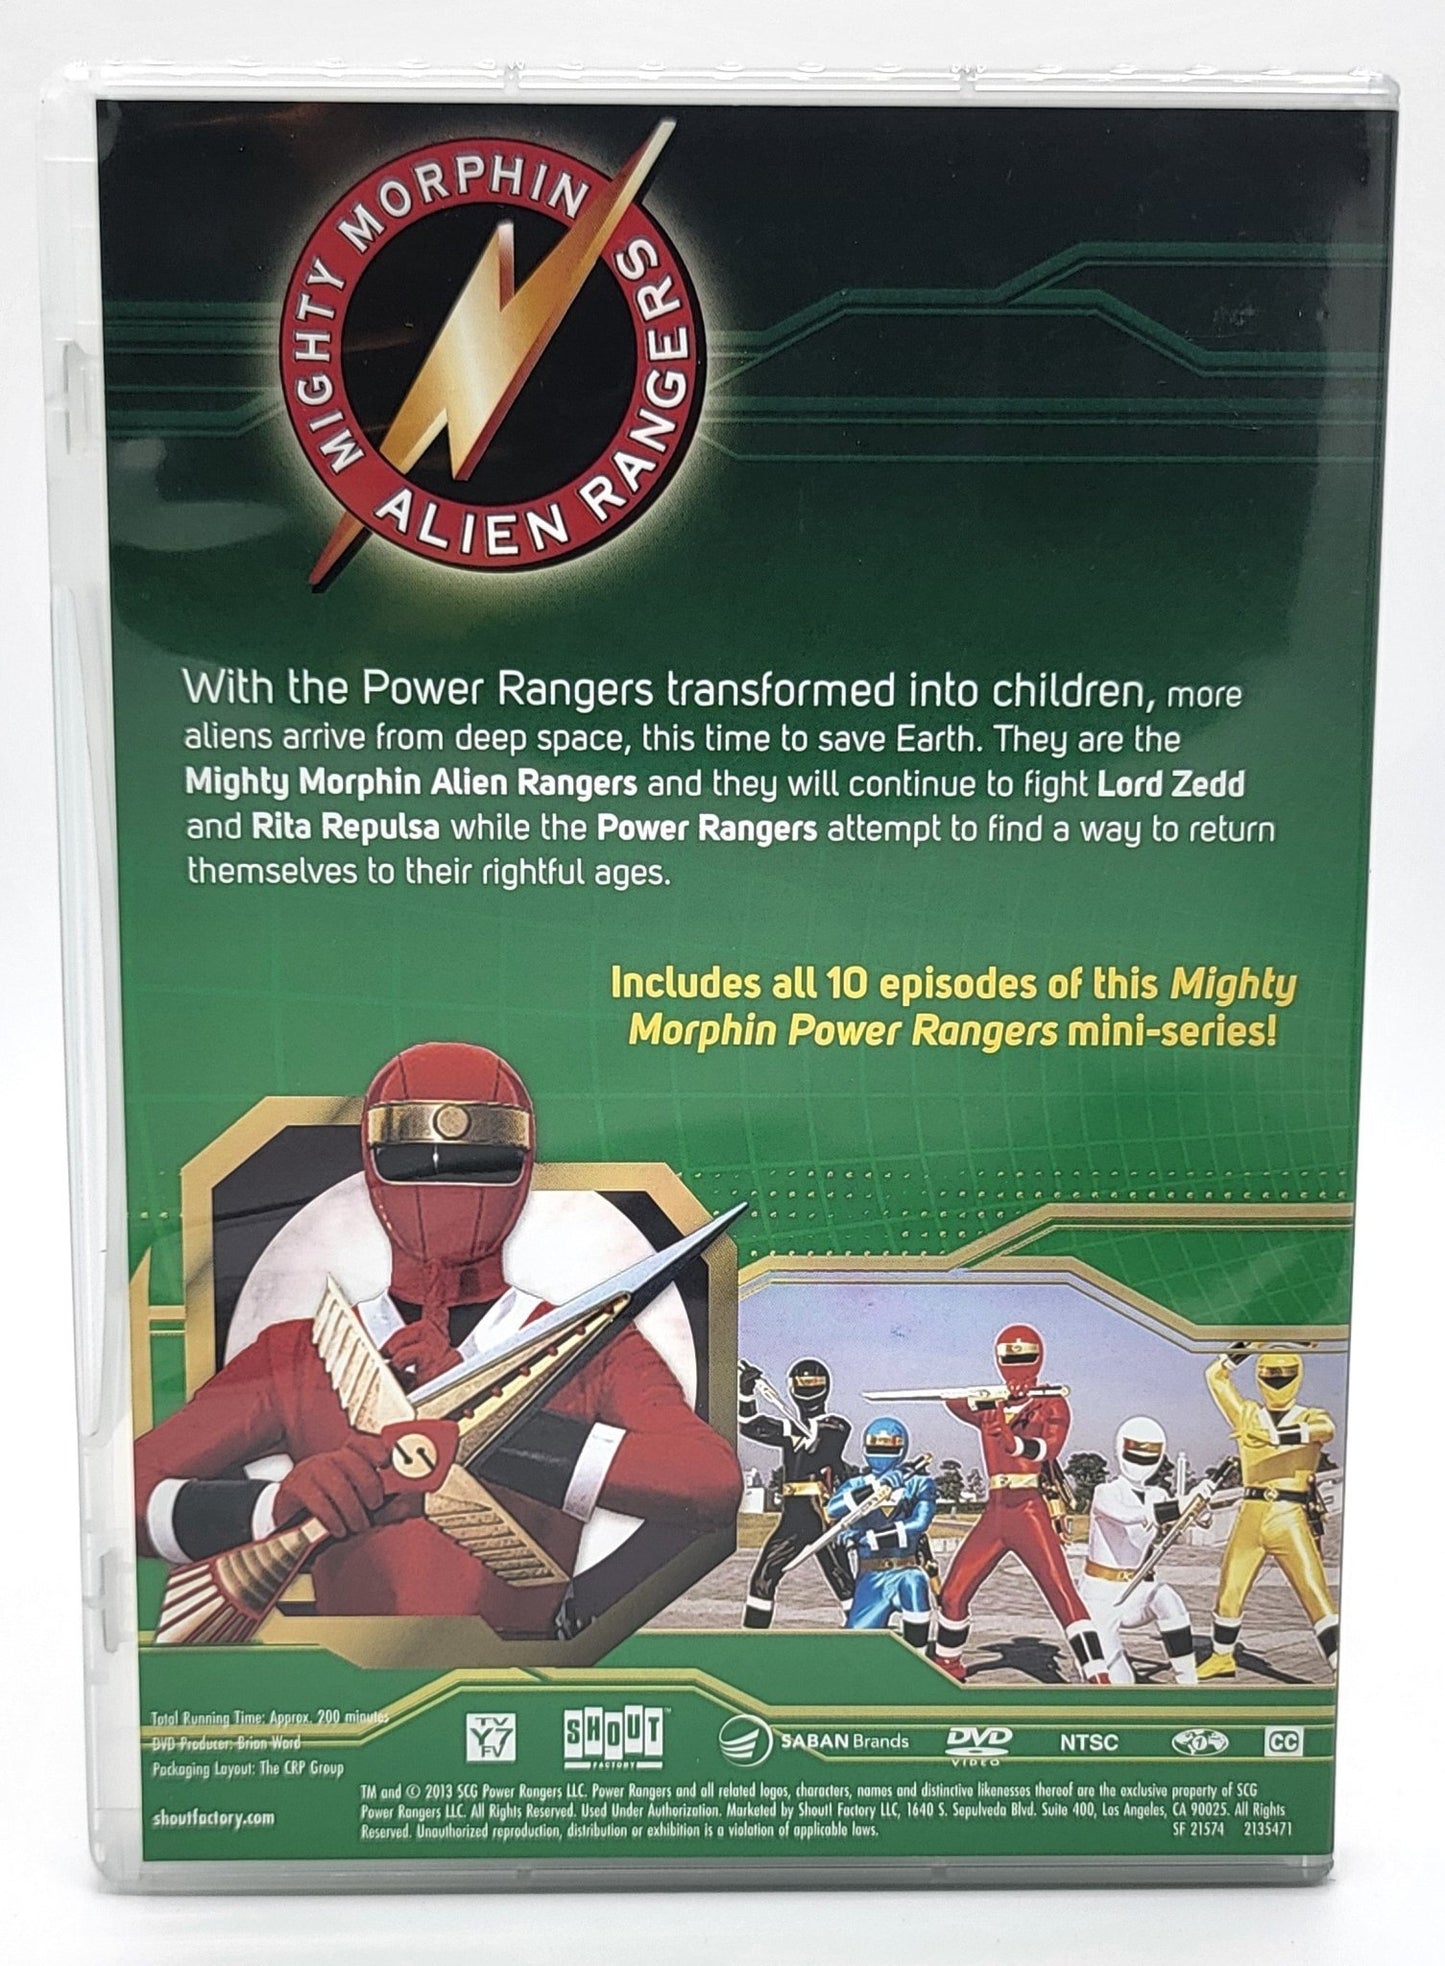 Shout Factory - Mighty Morphing Power Rangers | DVD | The Complete Series - DVD - Steady Bunny Shop